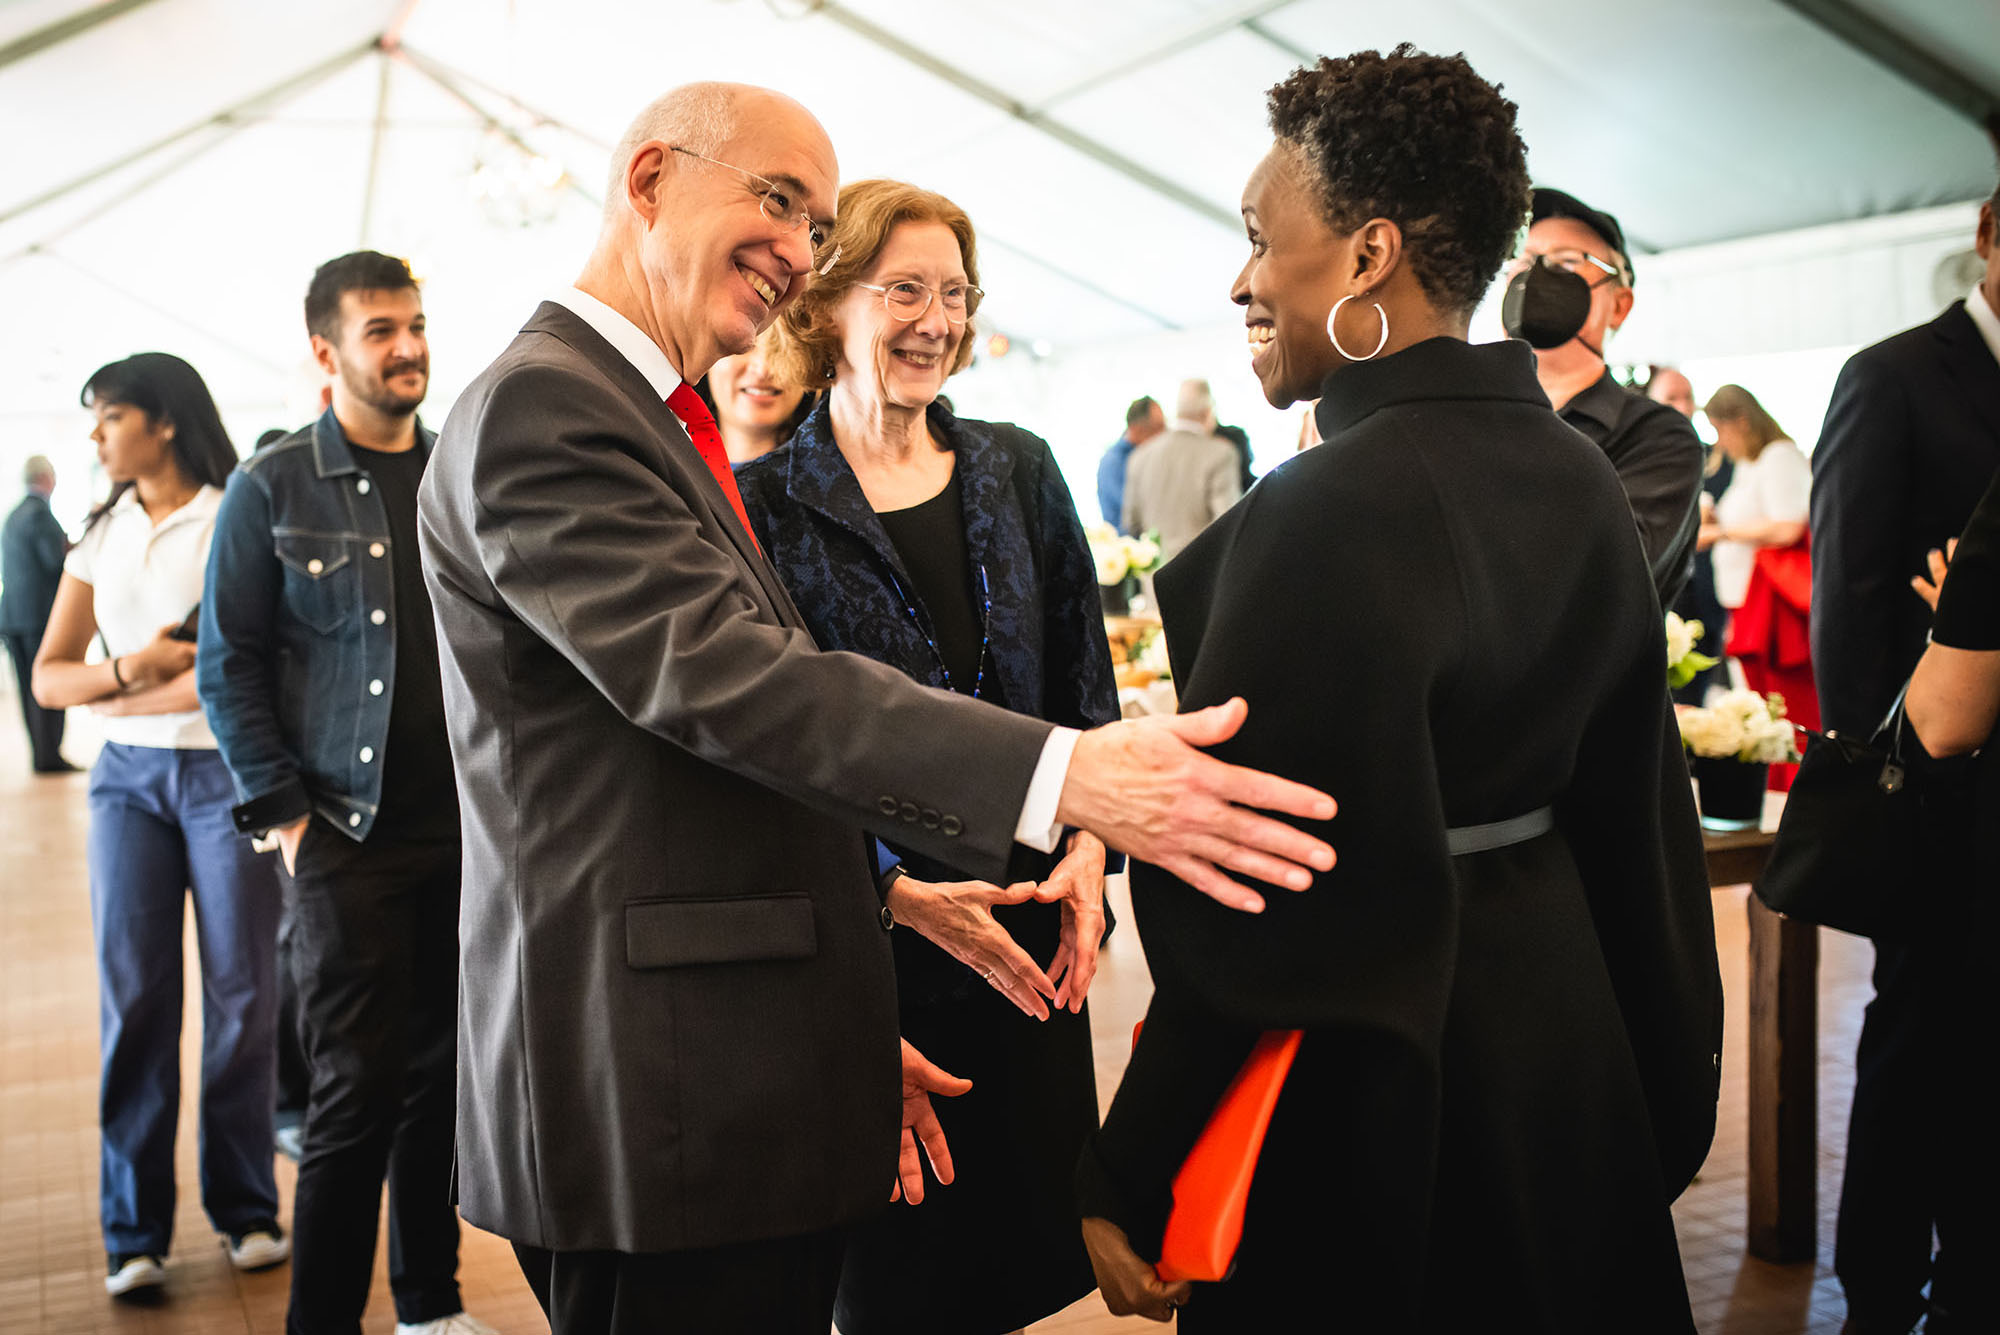 Photo: The new BU president, Melissa L. Gilliam (right), a Black woman wearing a black jacket and pants, greets Interim president Ken Freeman (left), a tall white man wearing a black suit and red tie, and his wife, Janice (center), a white woman wearing a black dress and blazer, during a reception.